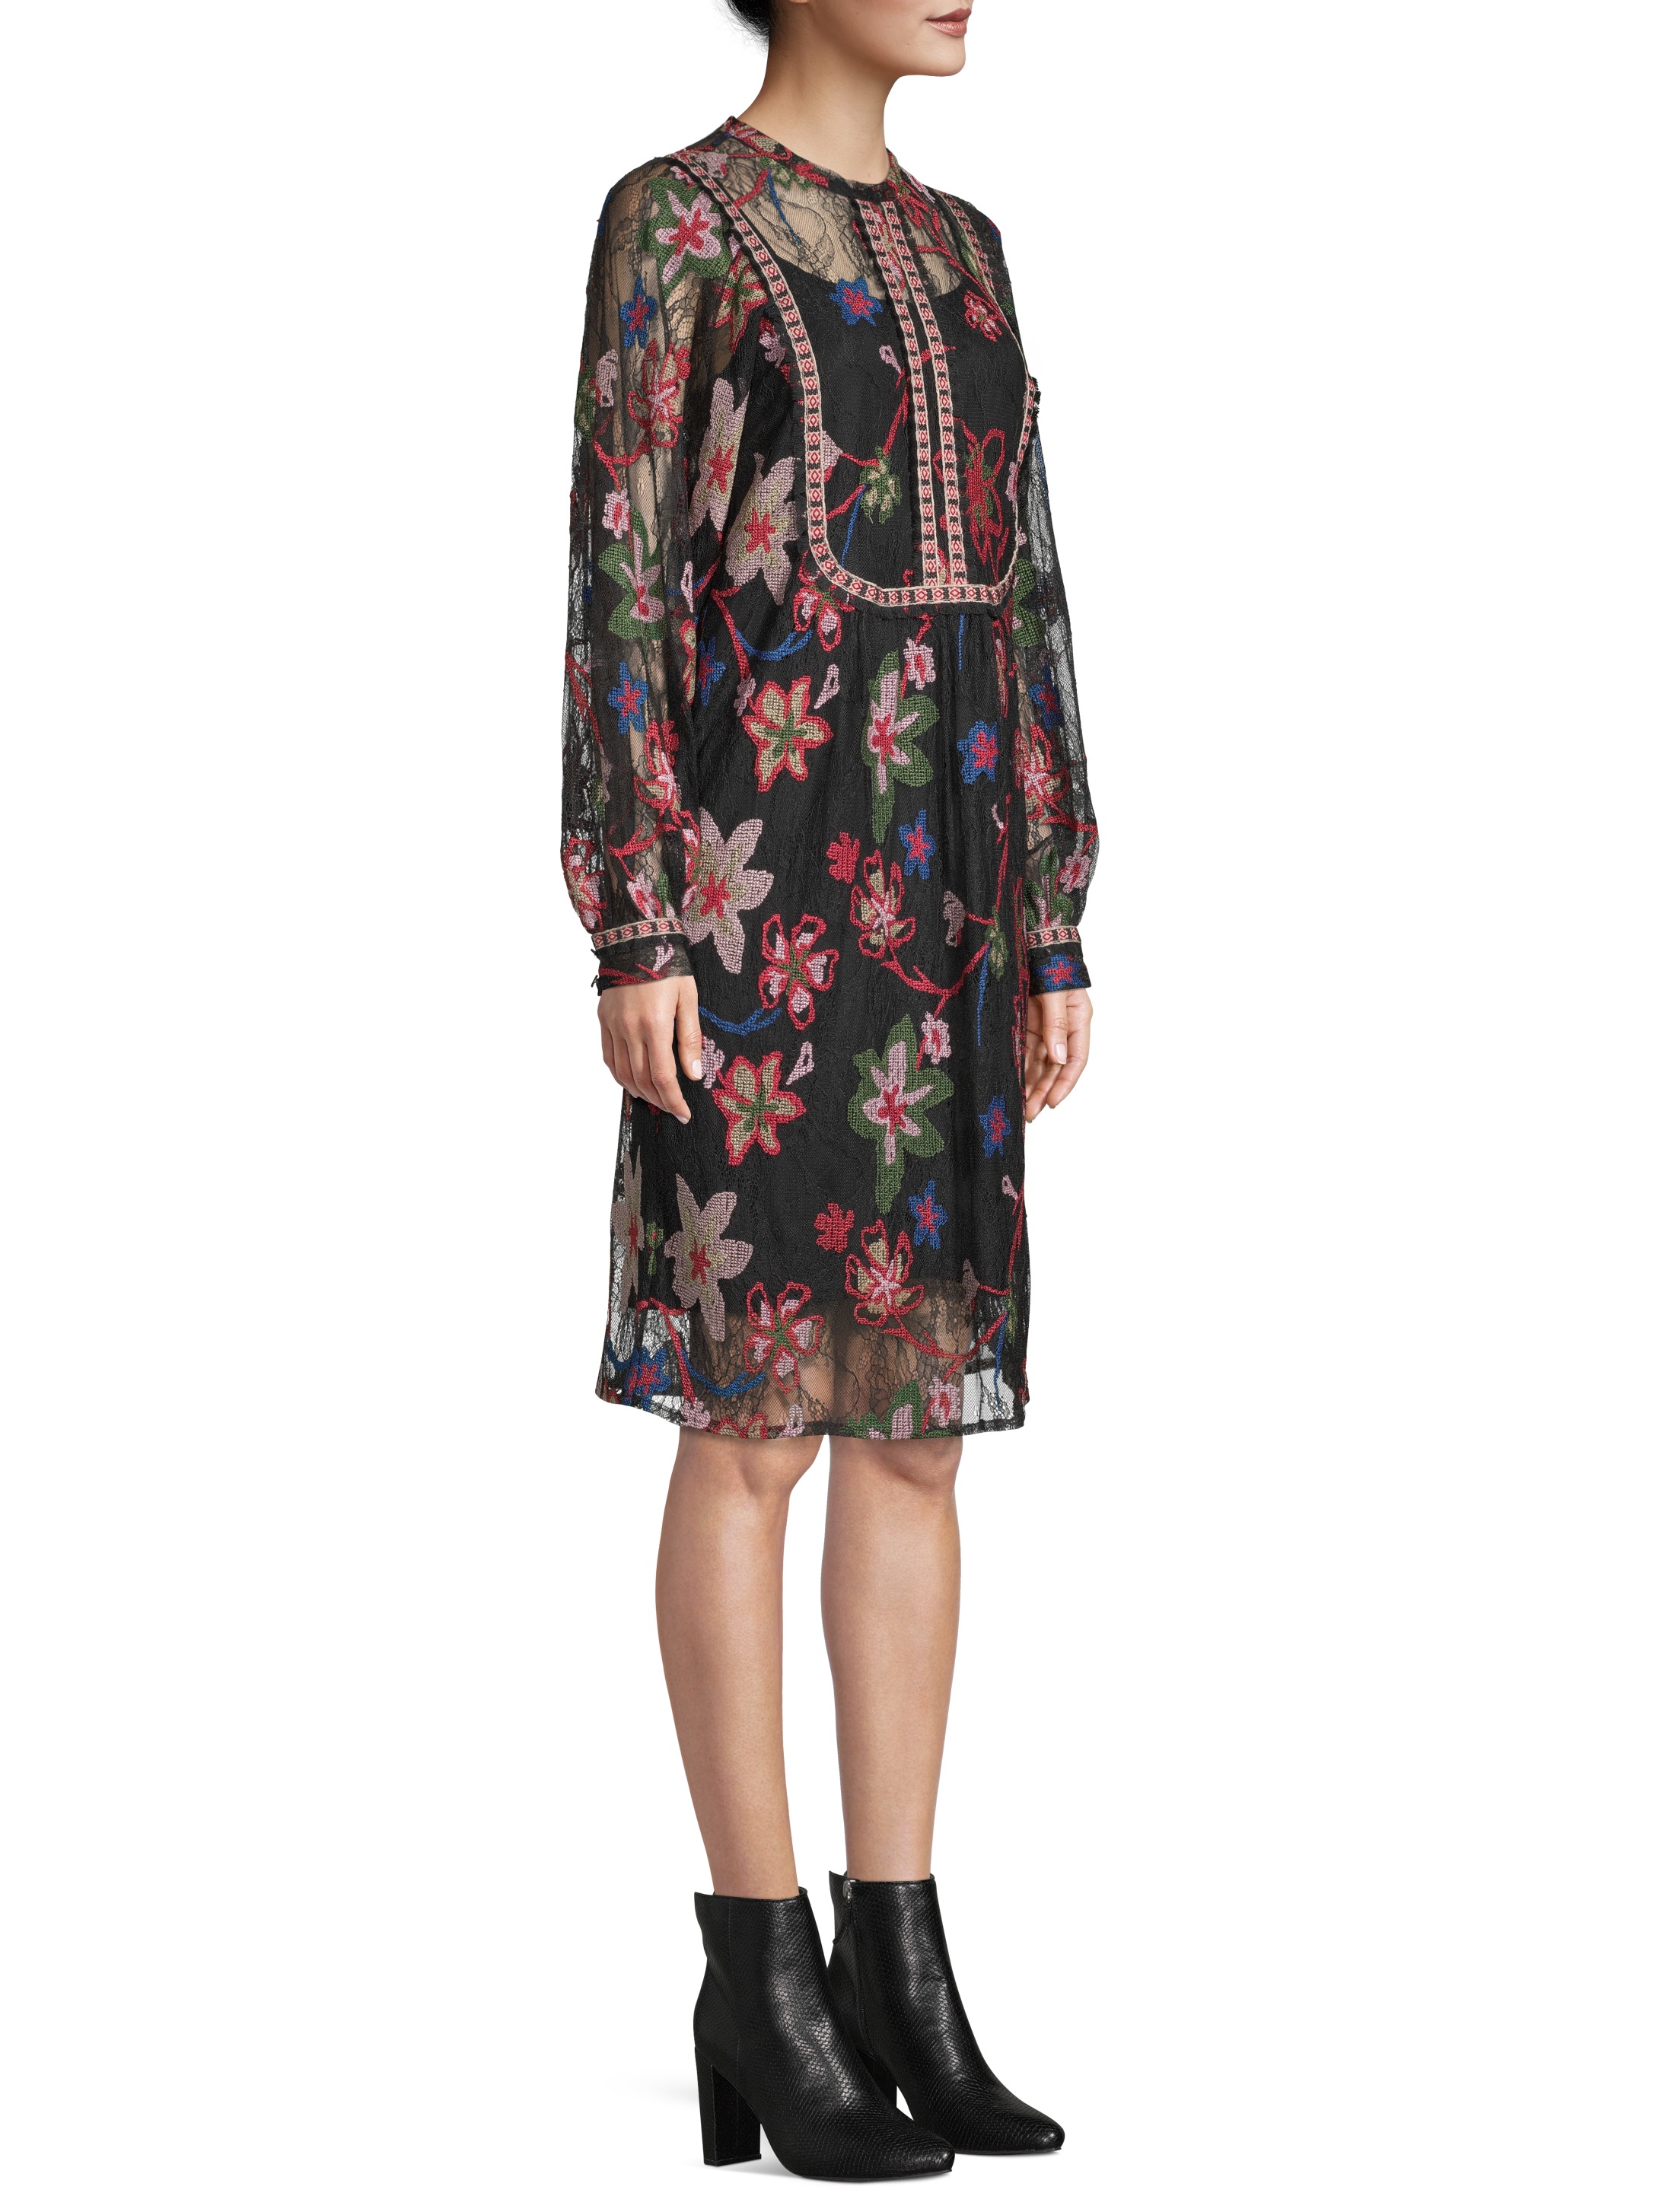 Sui by Anna Sui Women's Floral Embroidered Lace Dress - image 3 of 5